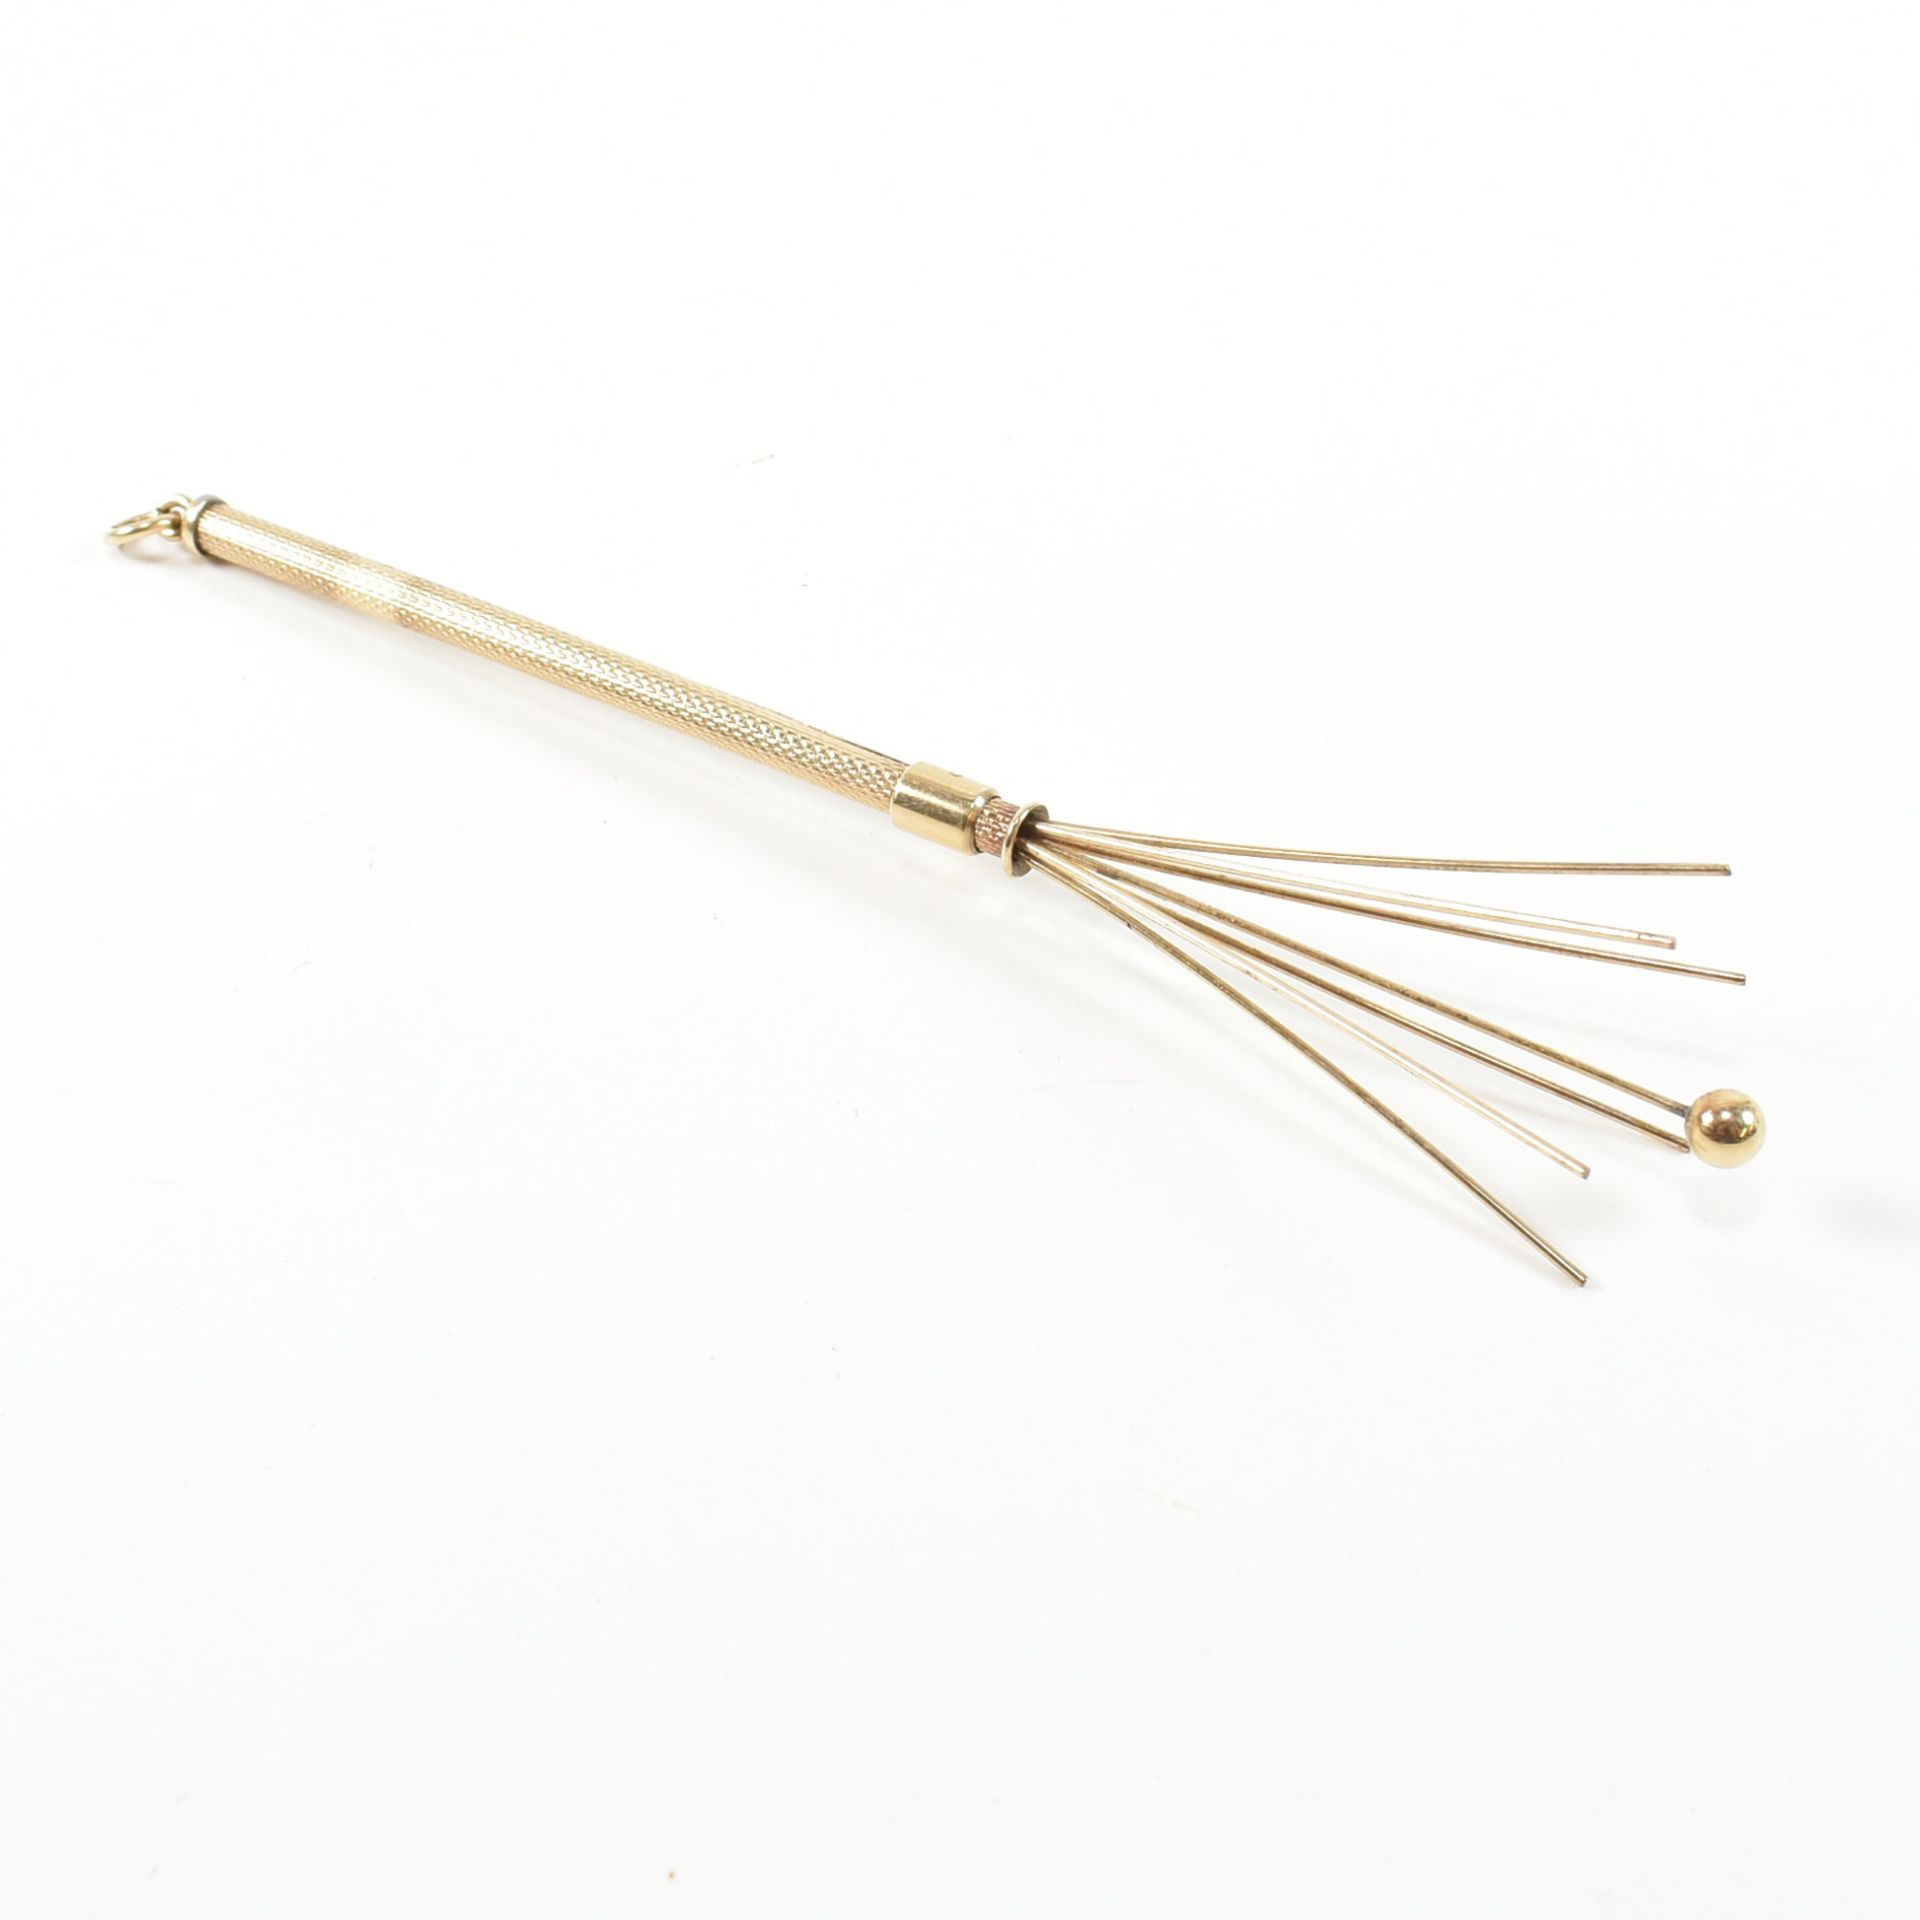 HALLMARKED 9CT GOLD CHAMPAGNE SWIZZLE STICK FOB - Image 4 of 5